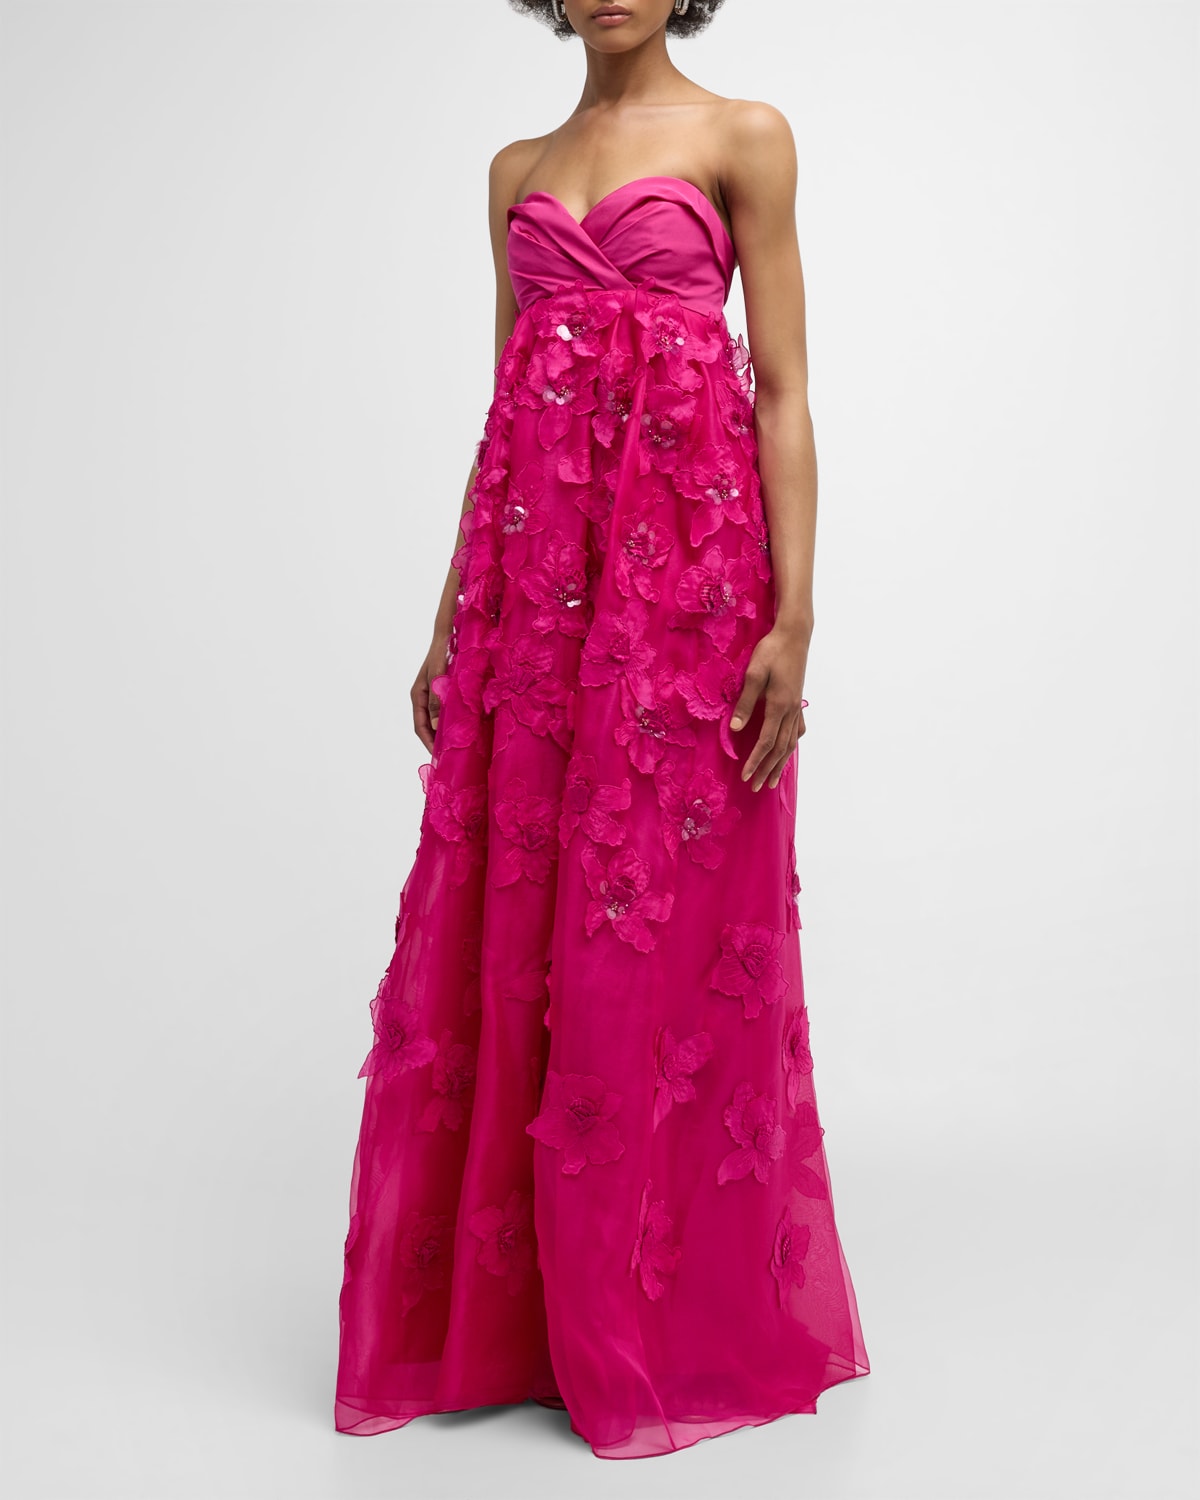 Embellished Floral Applique Gown with Wrap Front